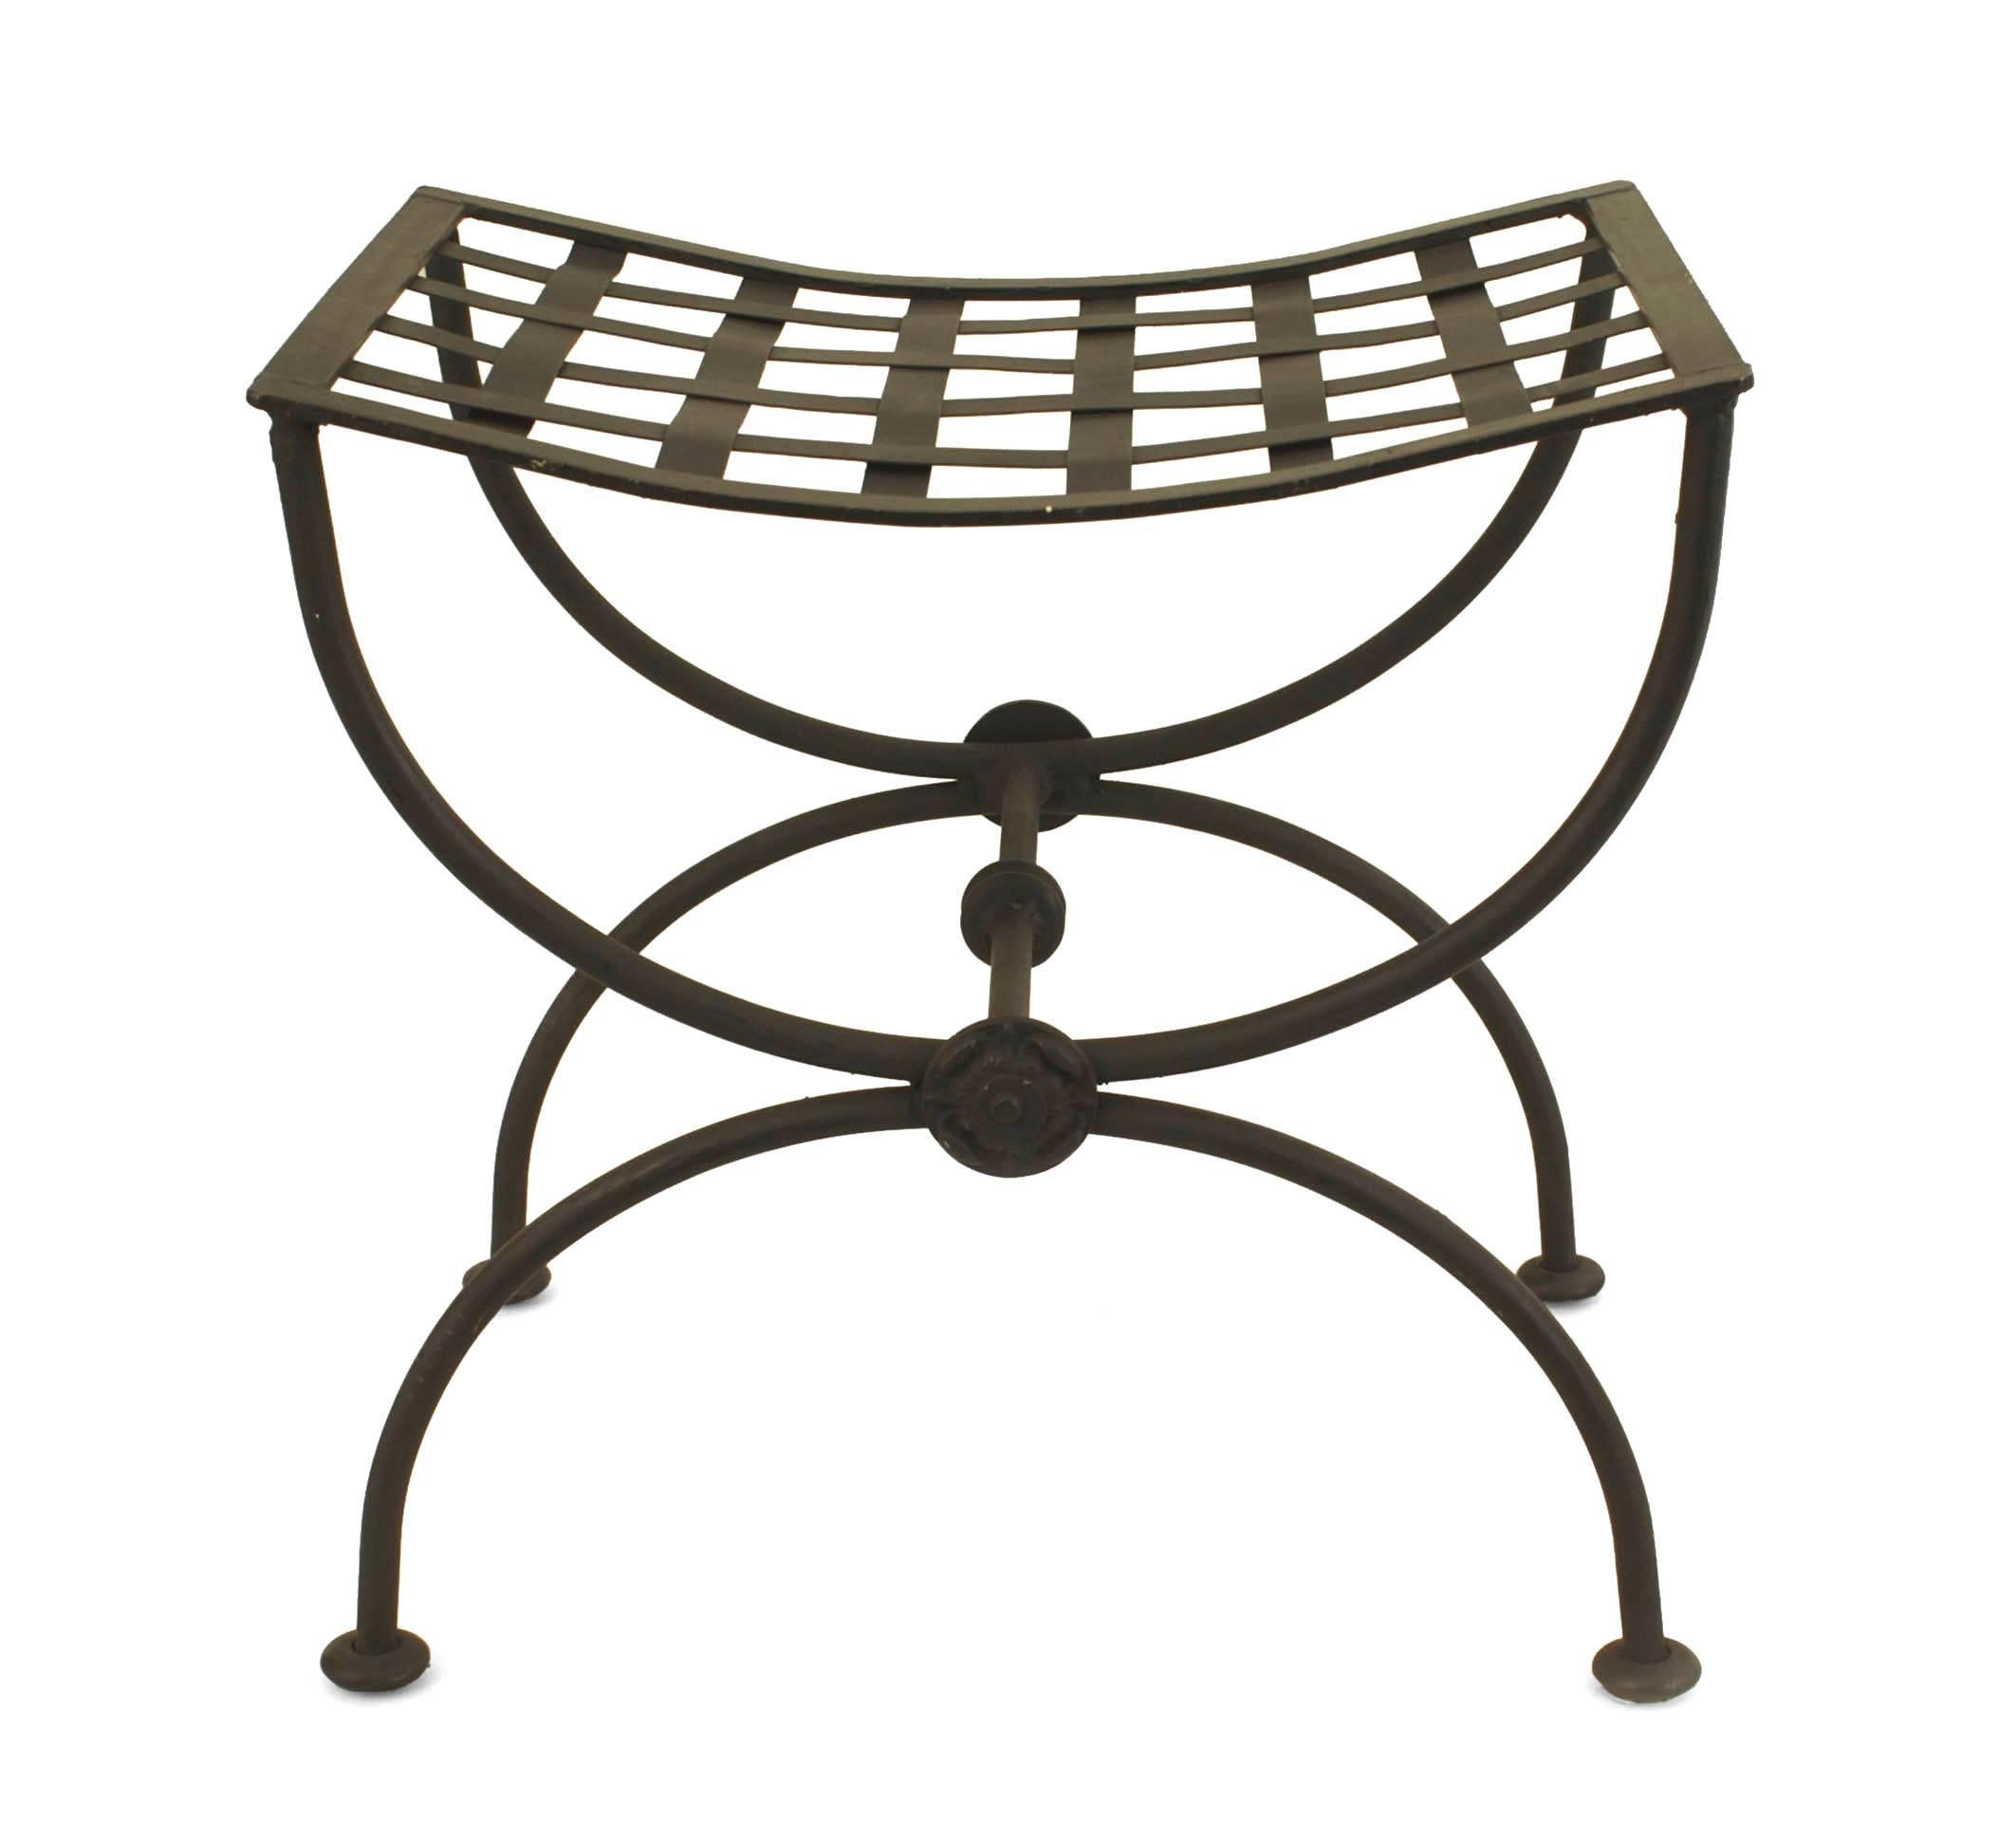 Pair of Italian Renaissance Wrought Iron Benches In Good Condition For Sale In New York, NY